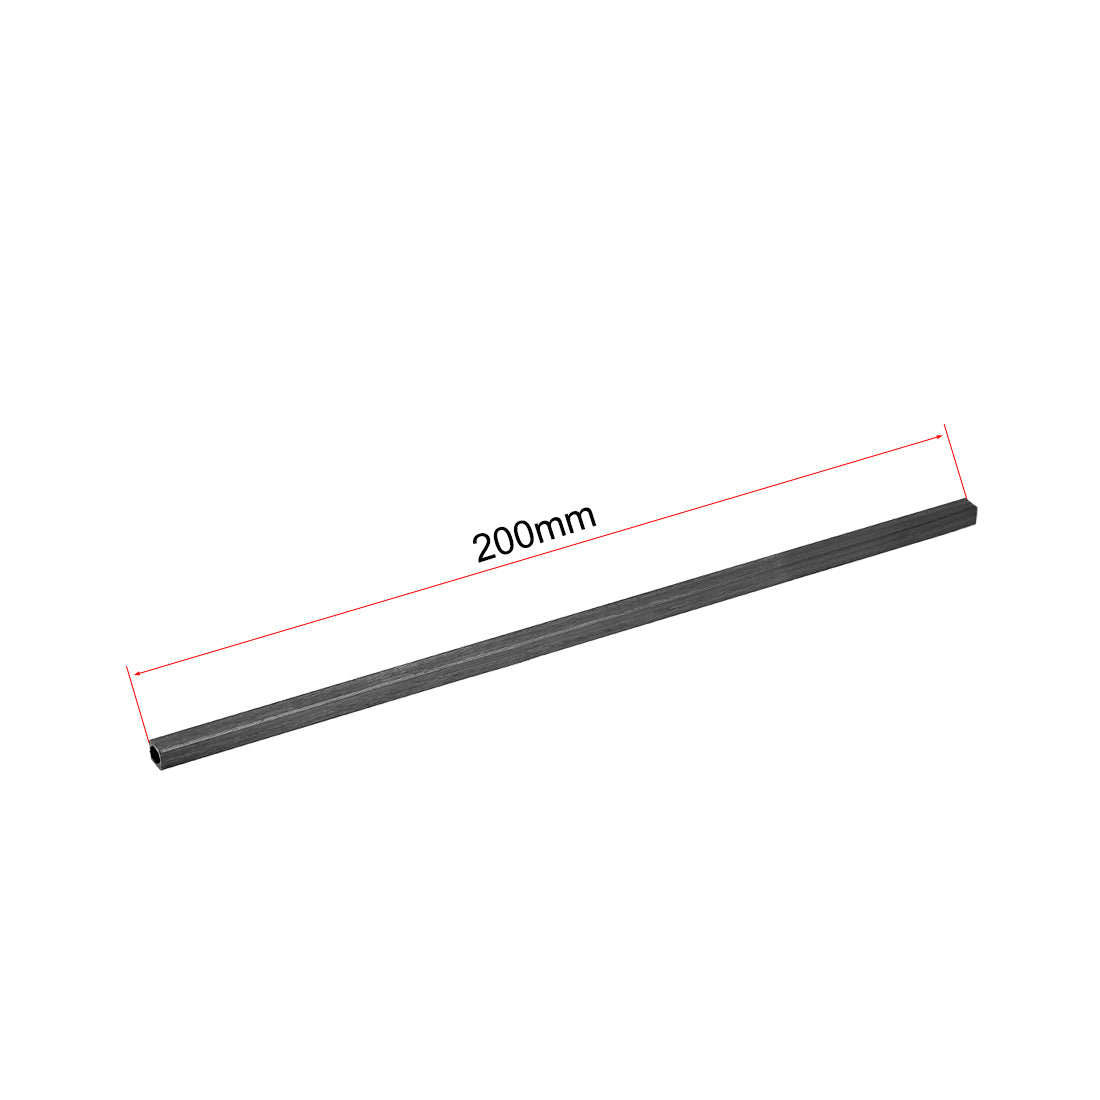 uxcell Uxcell Carbon Fiber Square Tube 5x5x4mm Inner Round Dia. 200mm Length Pultruded Carbon Fiber Tubing for RC Airplane 5 Pcs